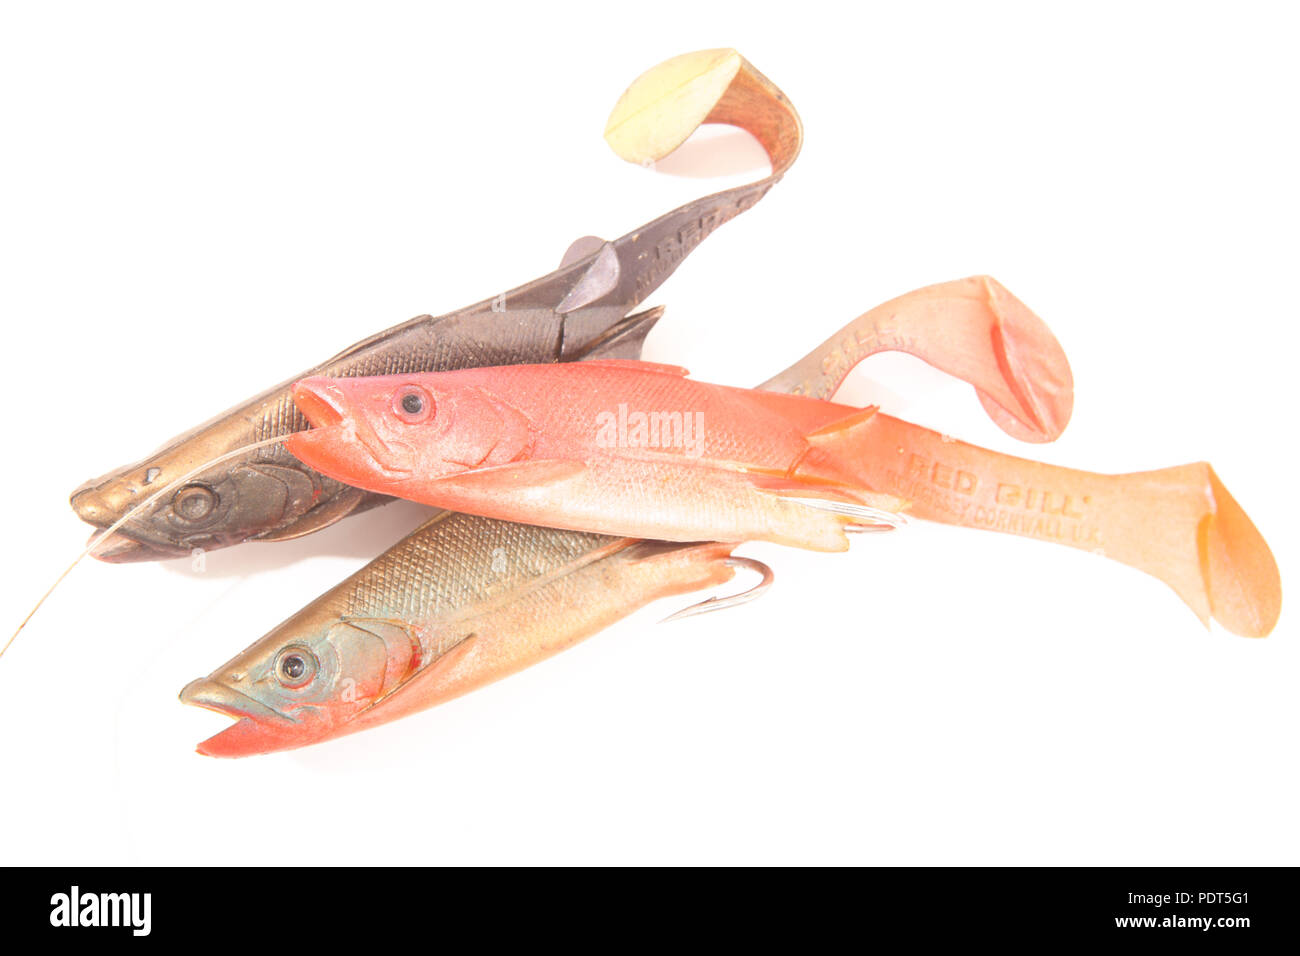 Old Red Gill fishing lures designed for catching seafish. From a